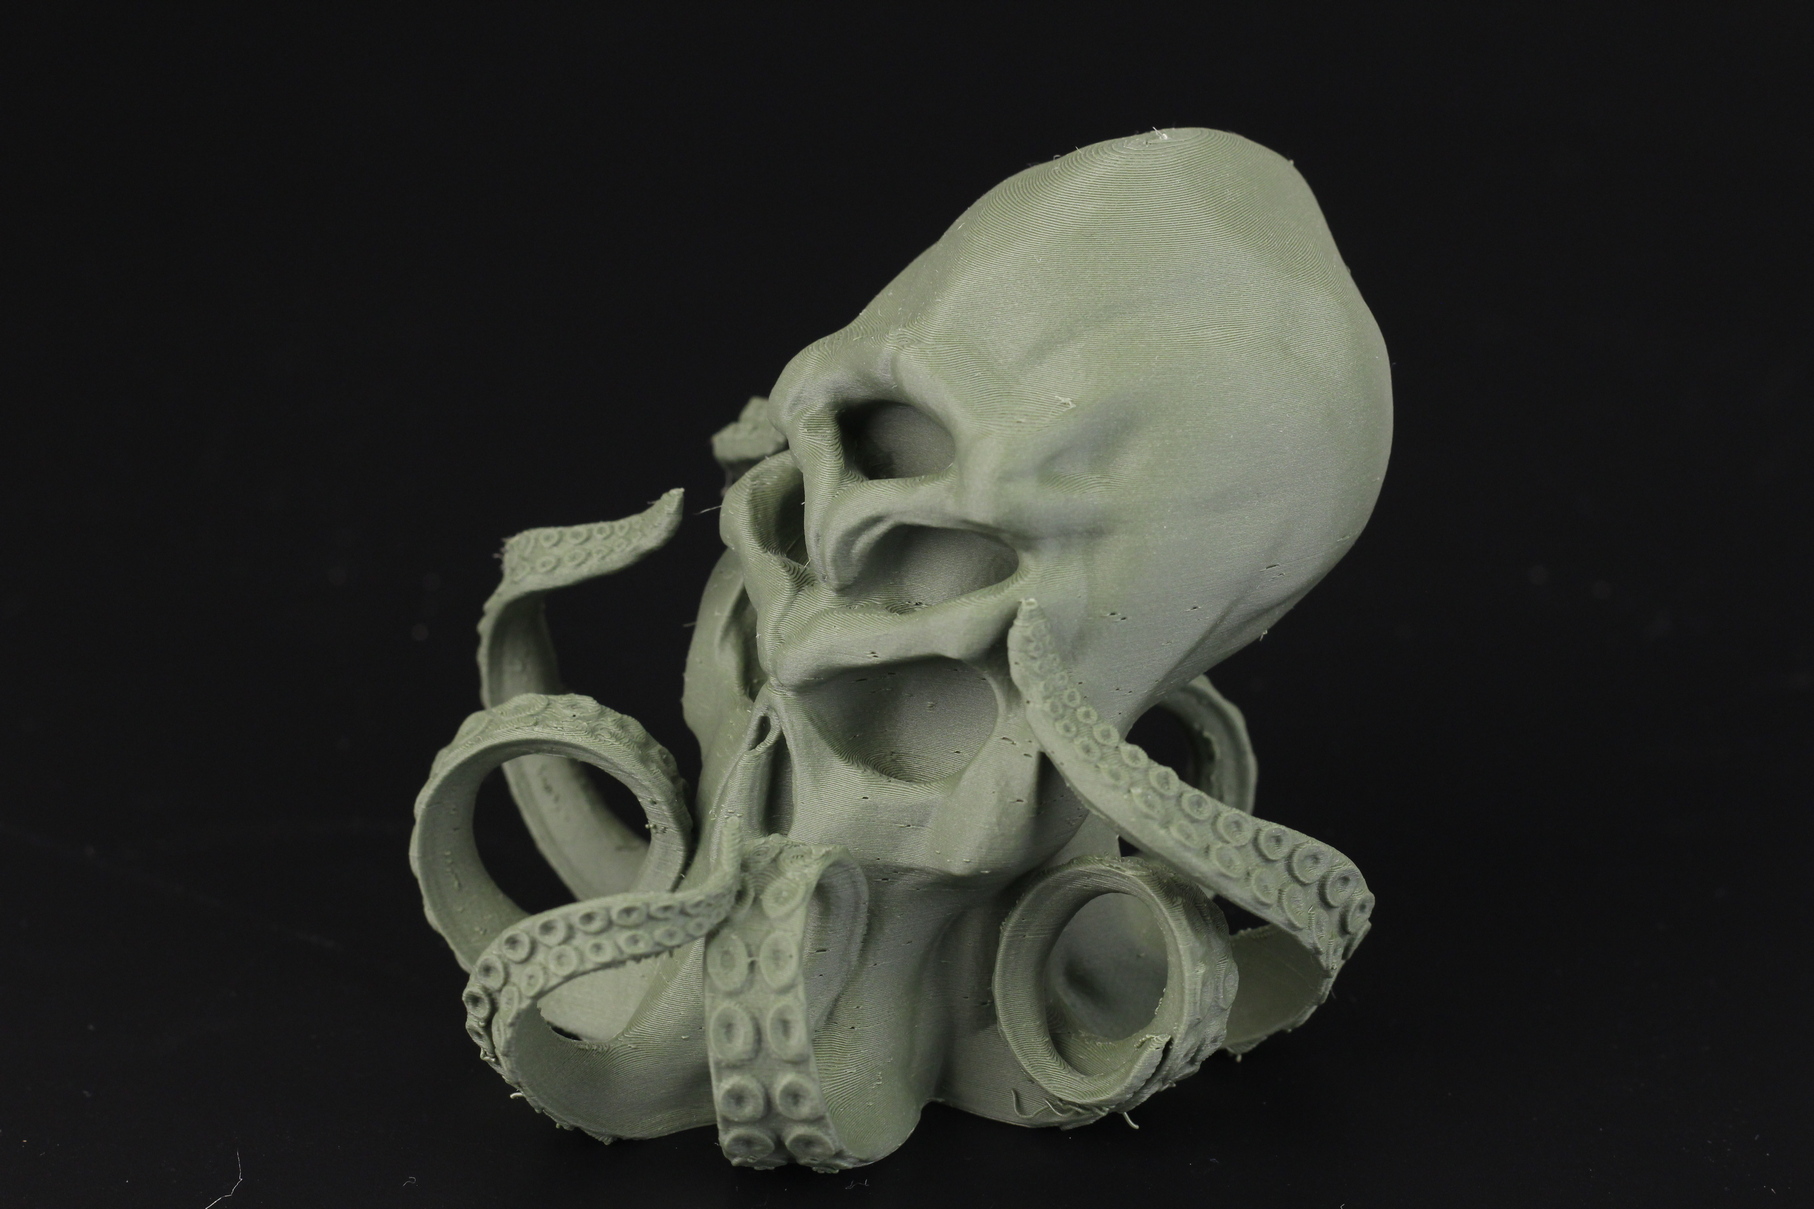 Cthulu printed on BIQU B1 SE PLUS 3 | BIQU B1 SE PLUS Review: SKR 2 and ABL from Factory